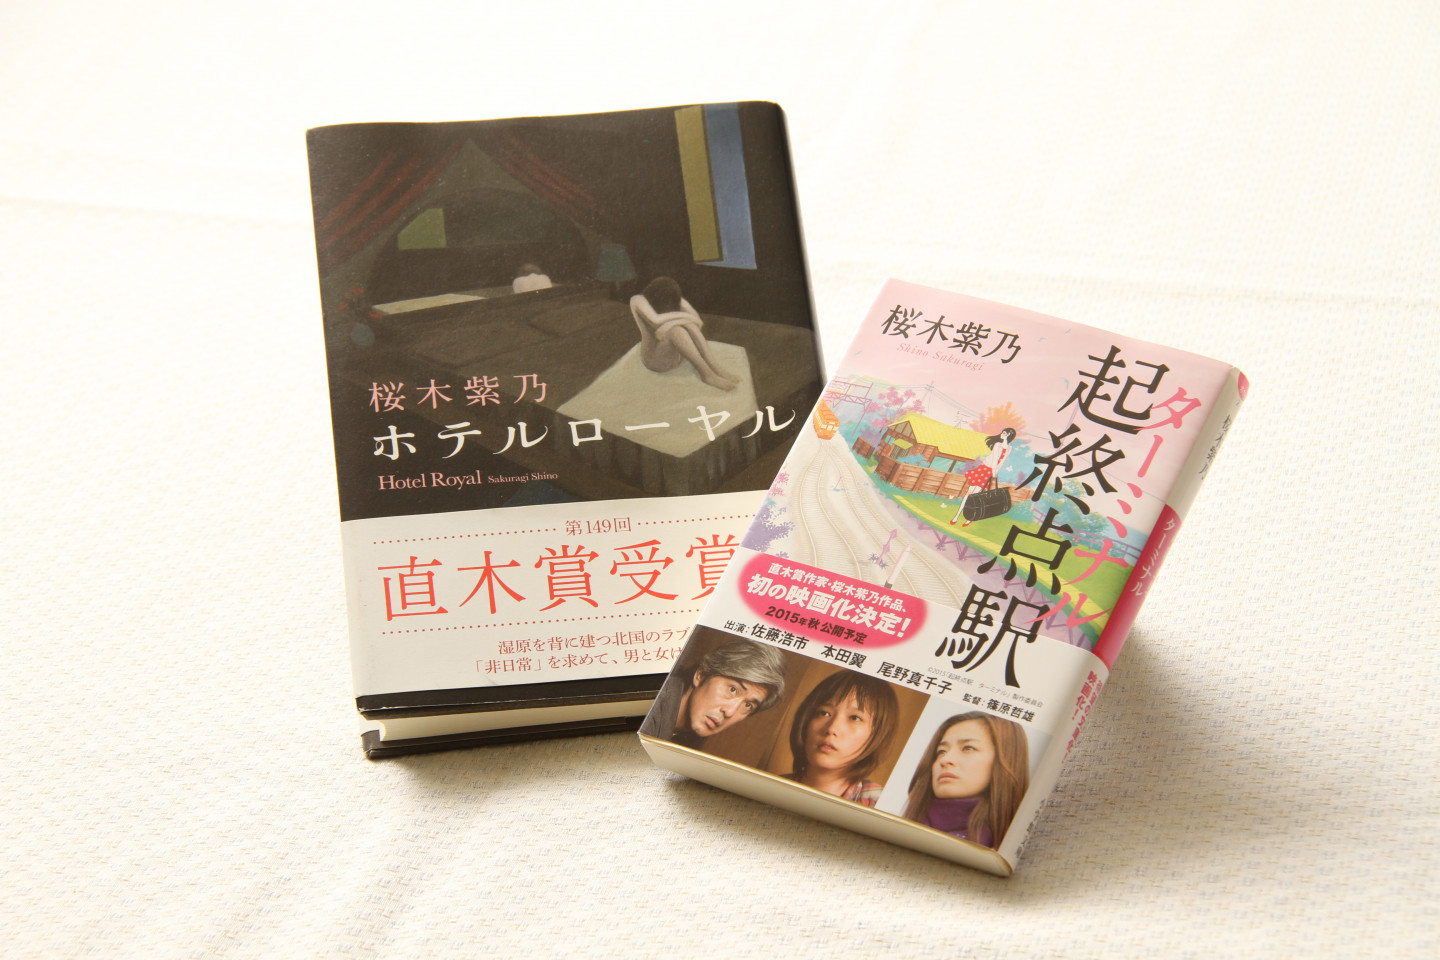 Novels written by authors from Kushiro whose story actually takes place in Kushiro